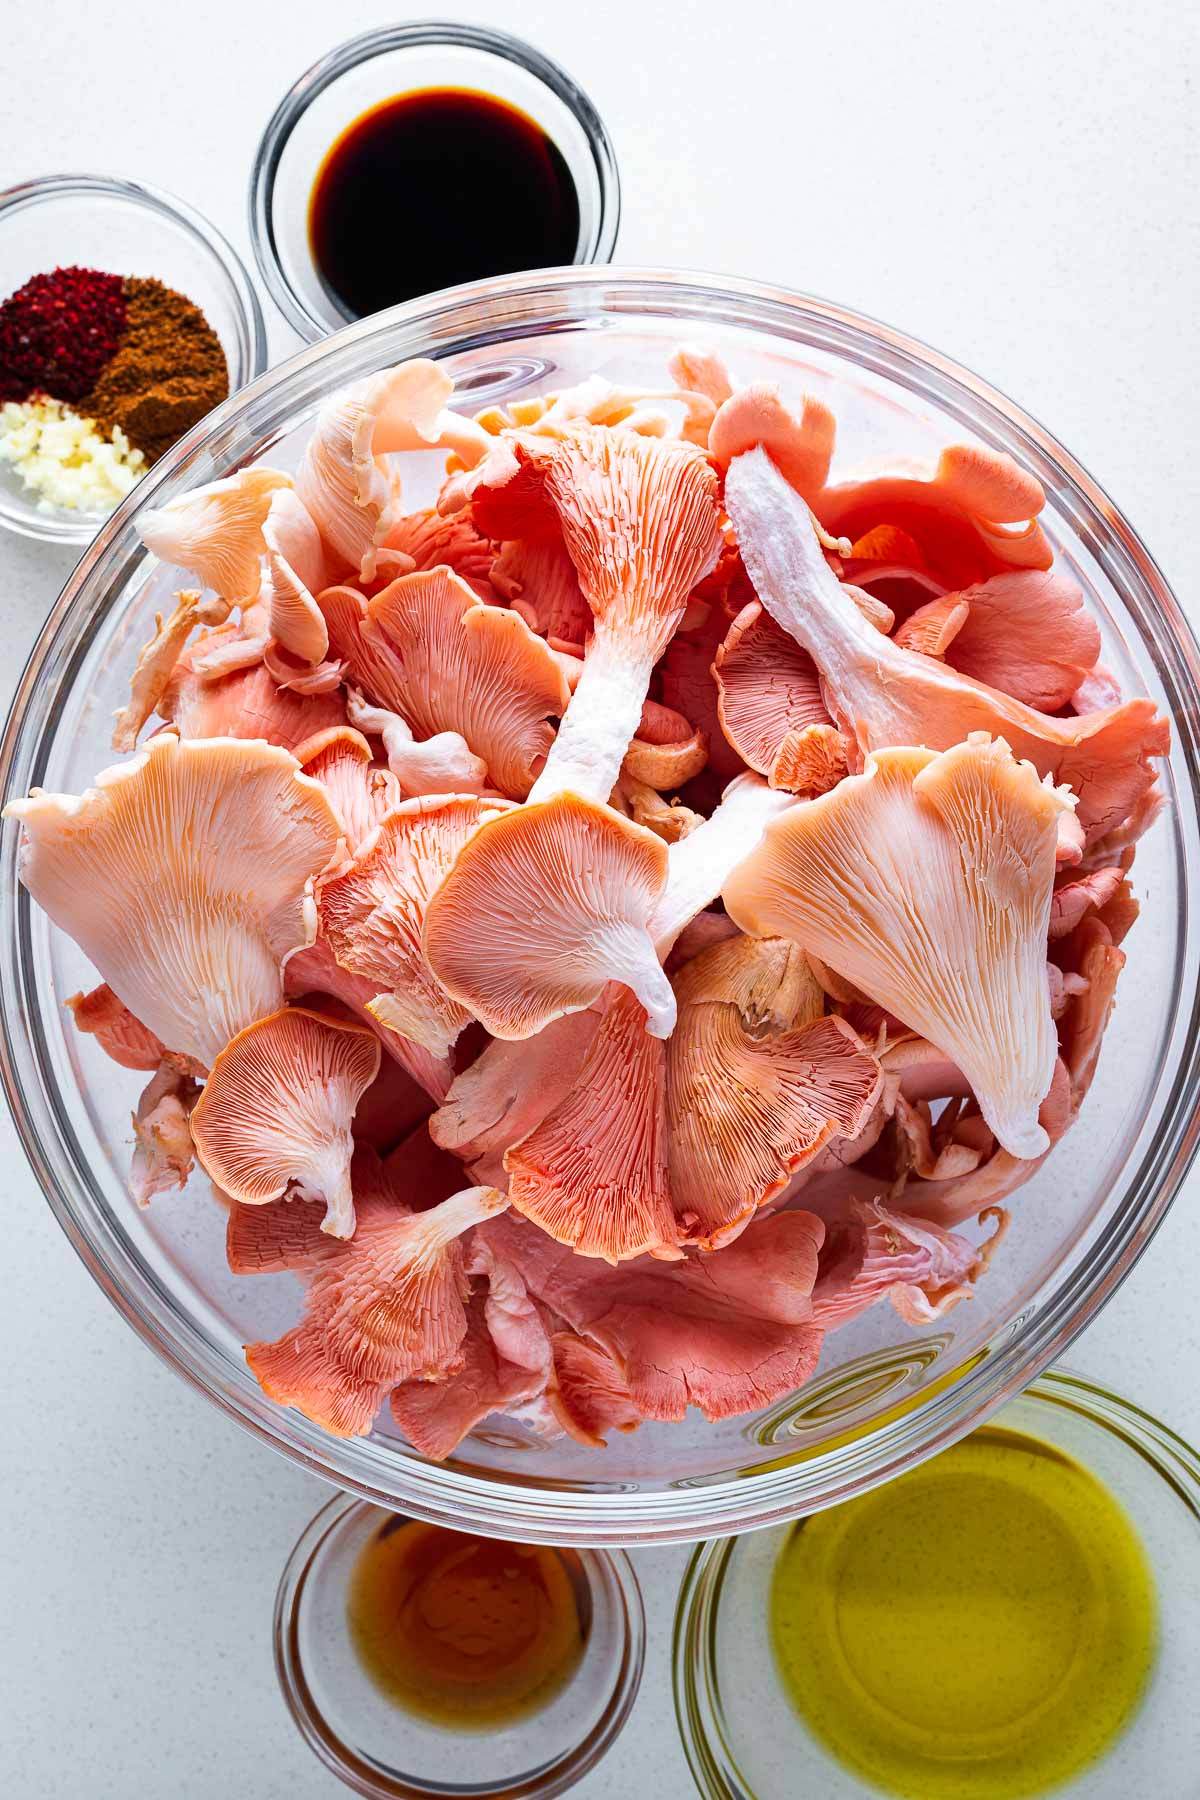 Top down view of a bowl of pink oyster mushrooms surrounded by multiple small bowls with marinade ingredients.